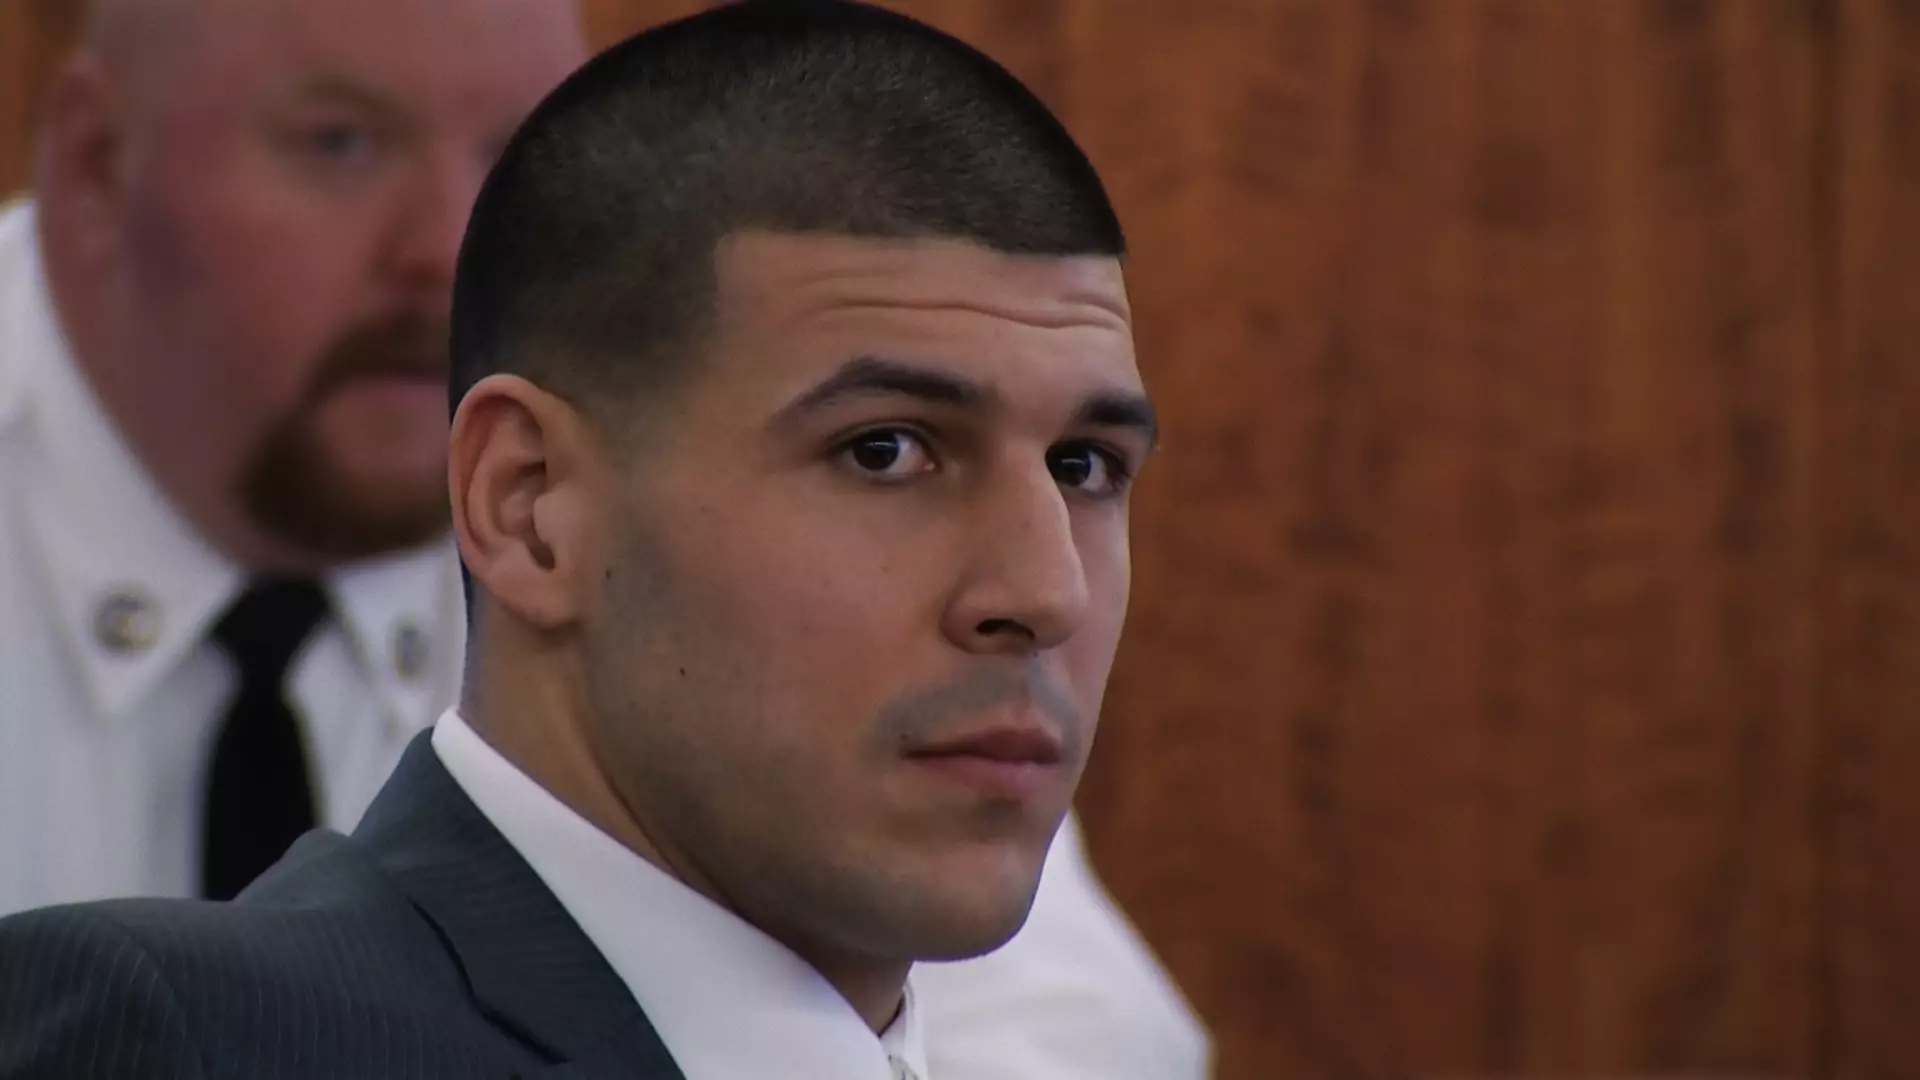 Hernandez was sentenced to serve life in prison without the chance of parole (